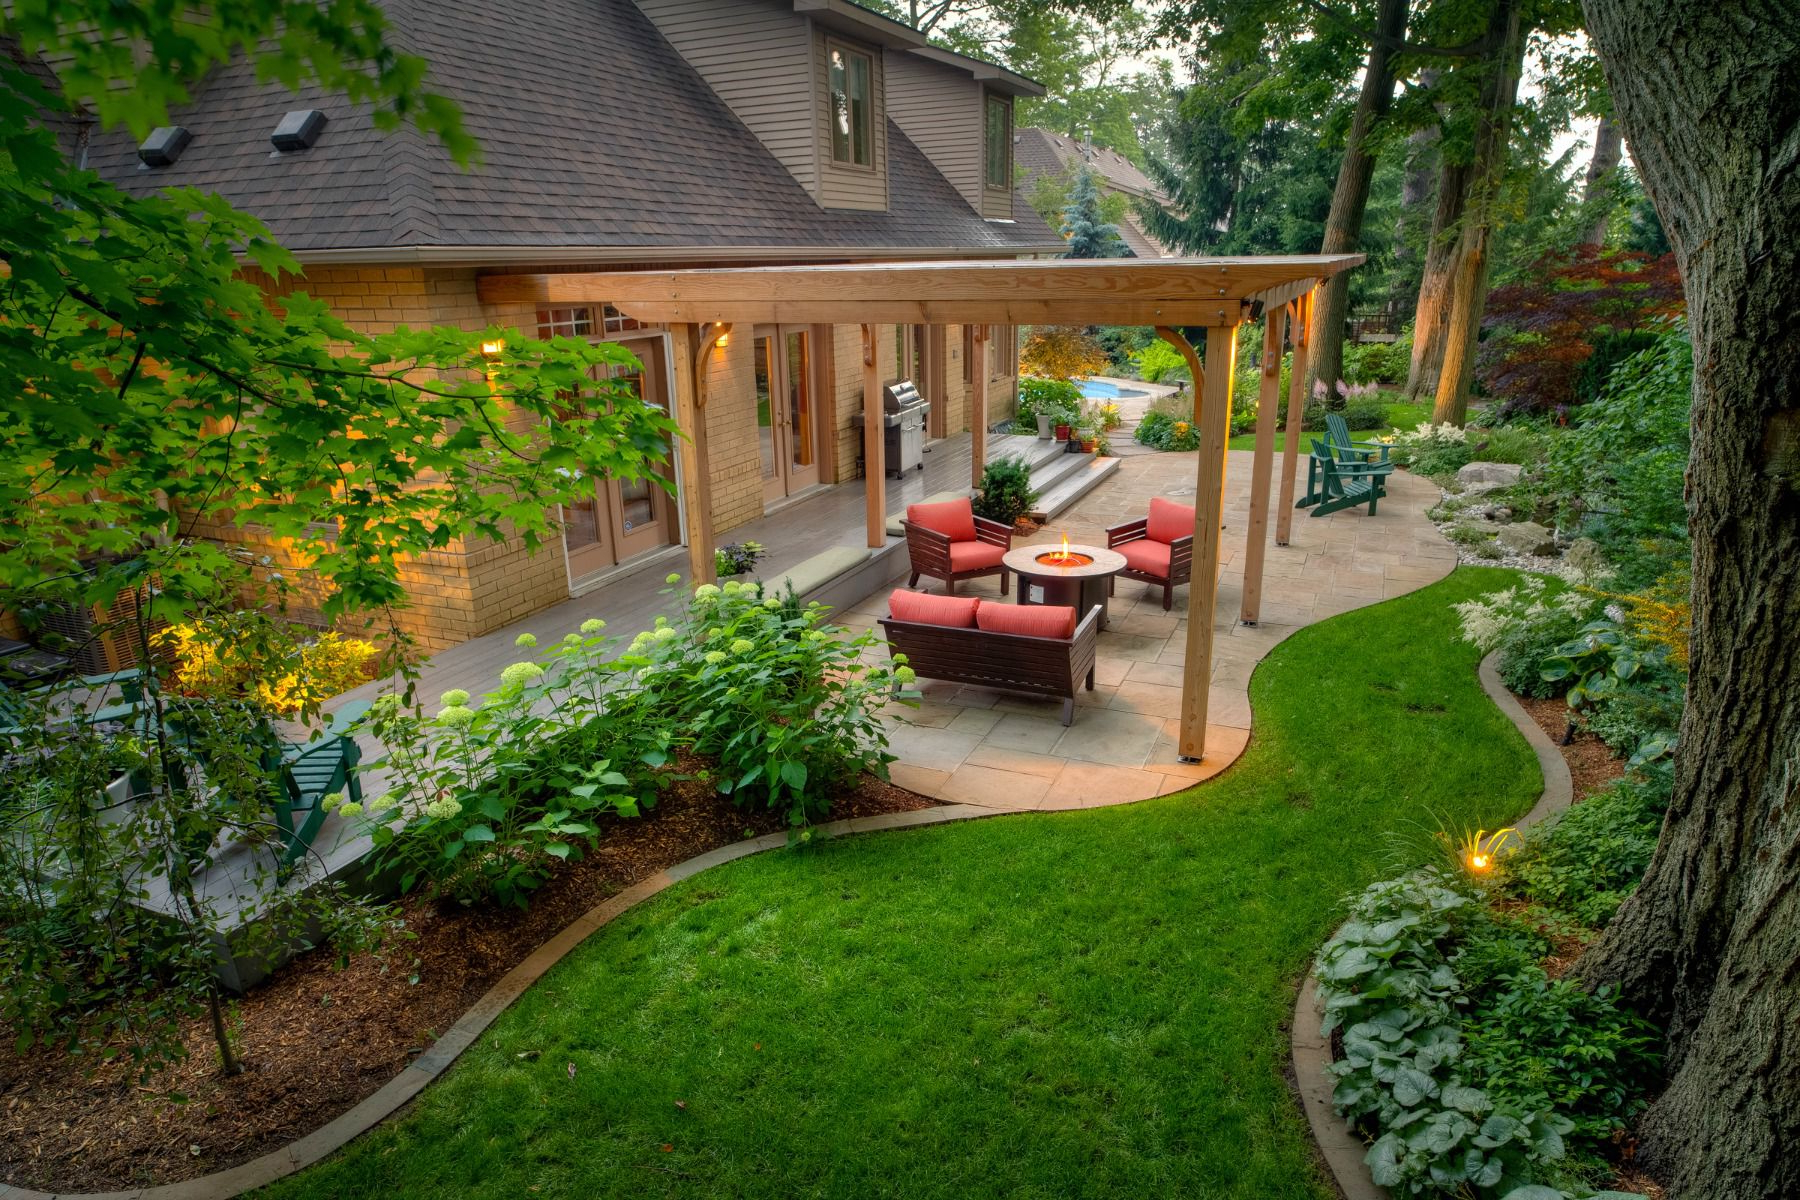 49 Backyard Landscaping Ideas To Inspire You